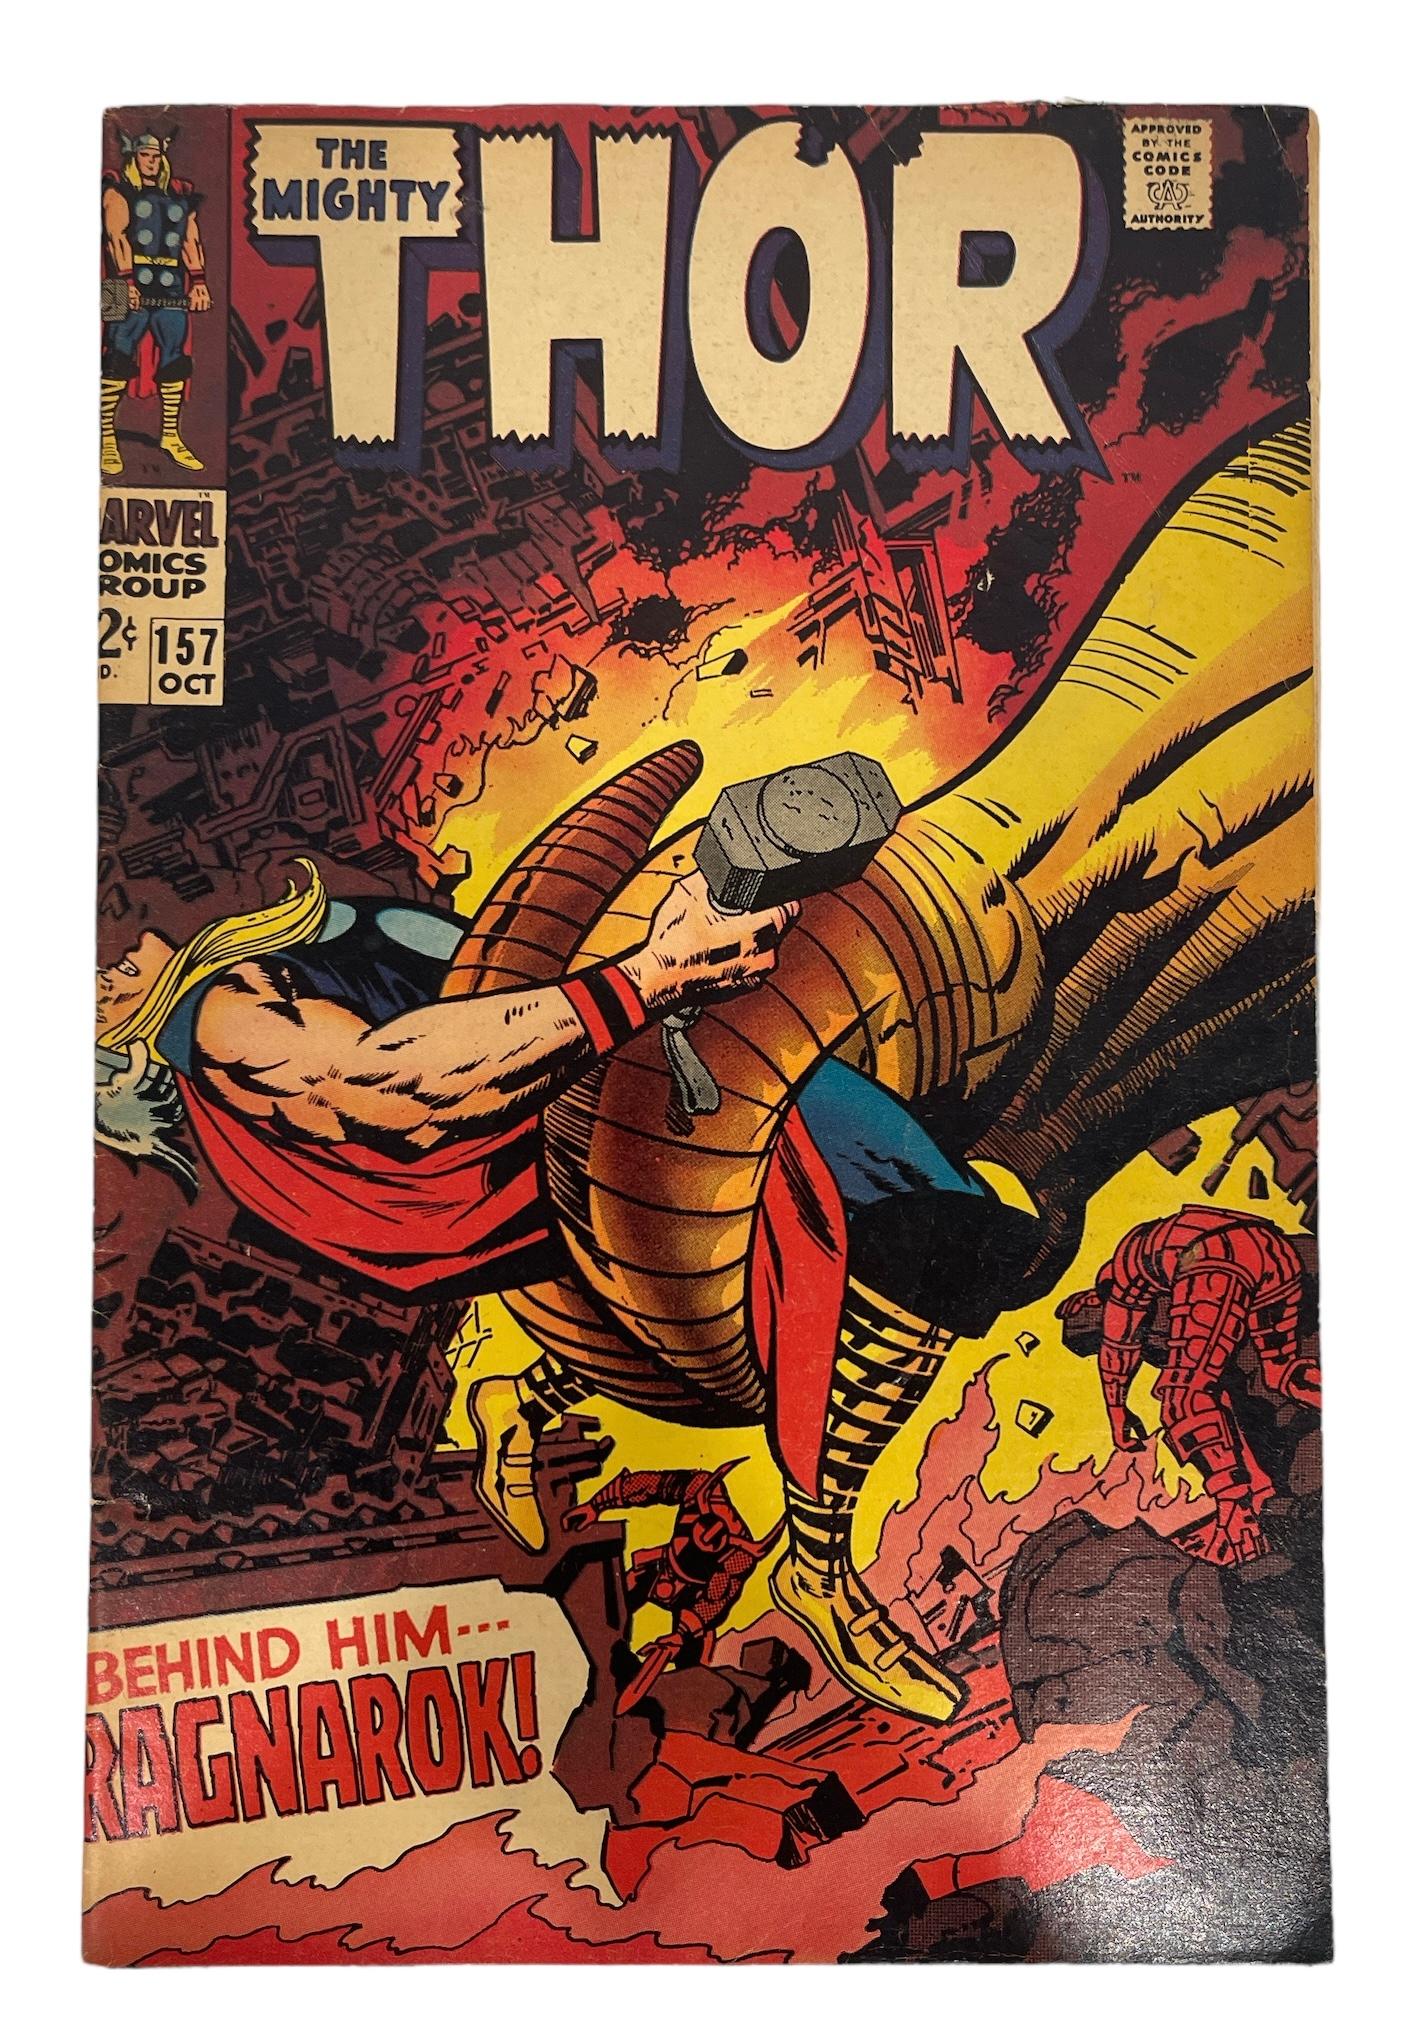 Vintage Marvel Comics - The Mighty Thor No.171 and No.157